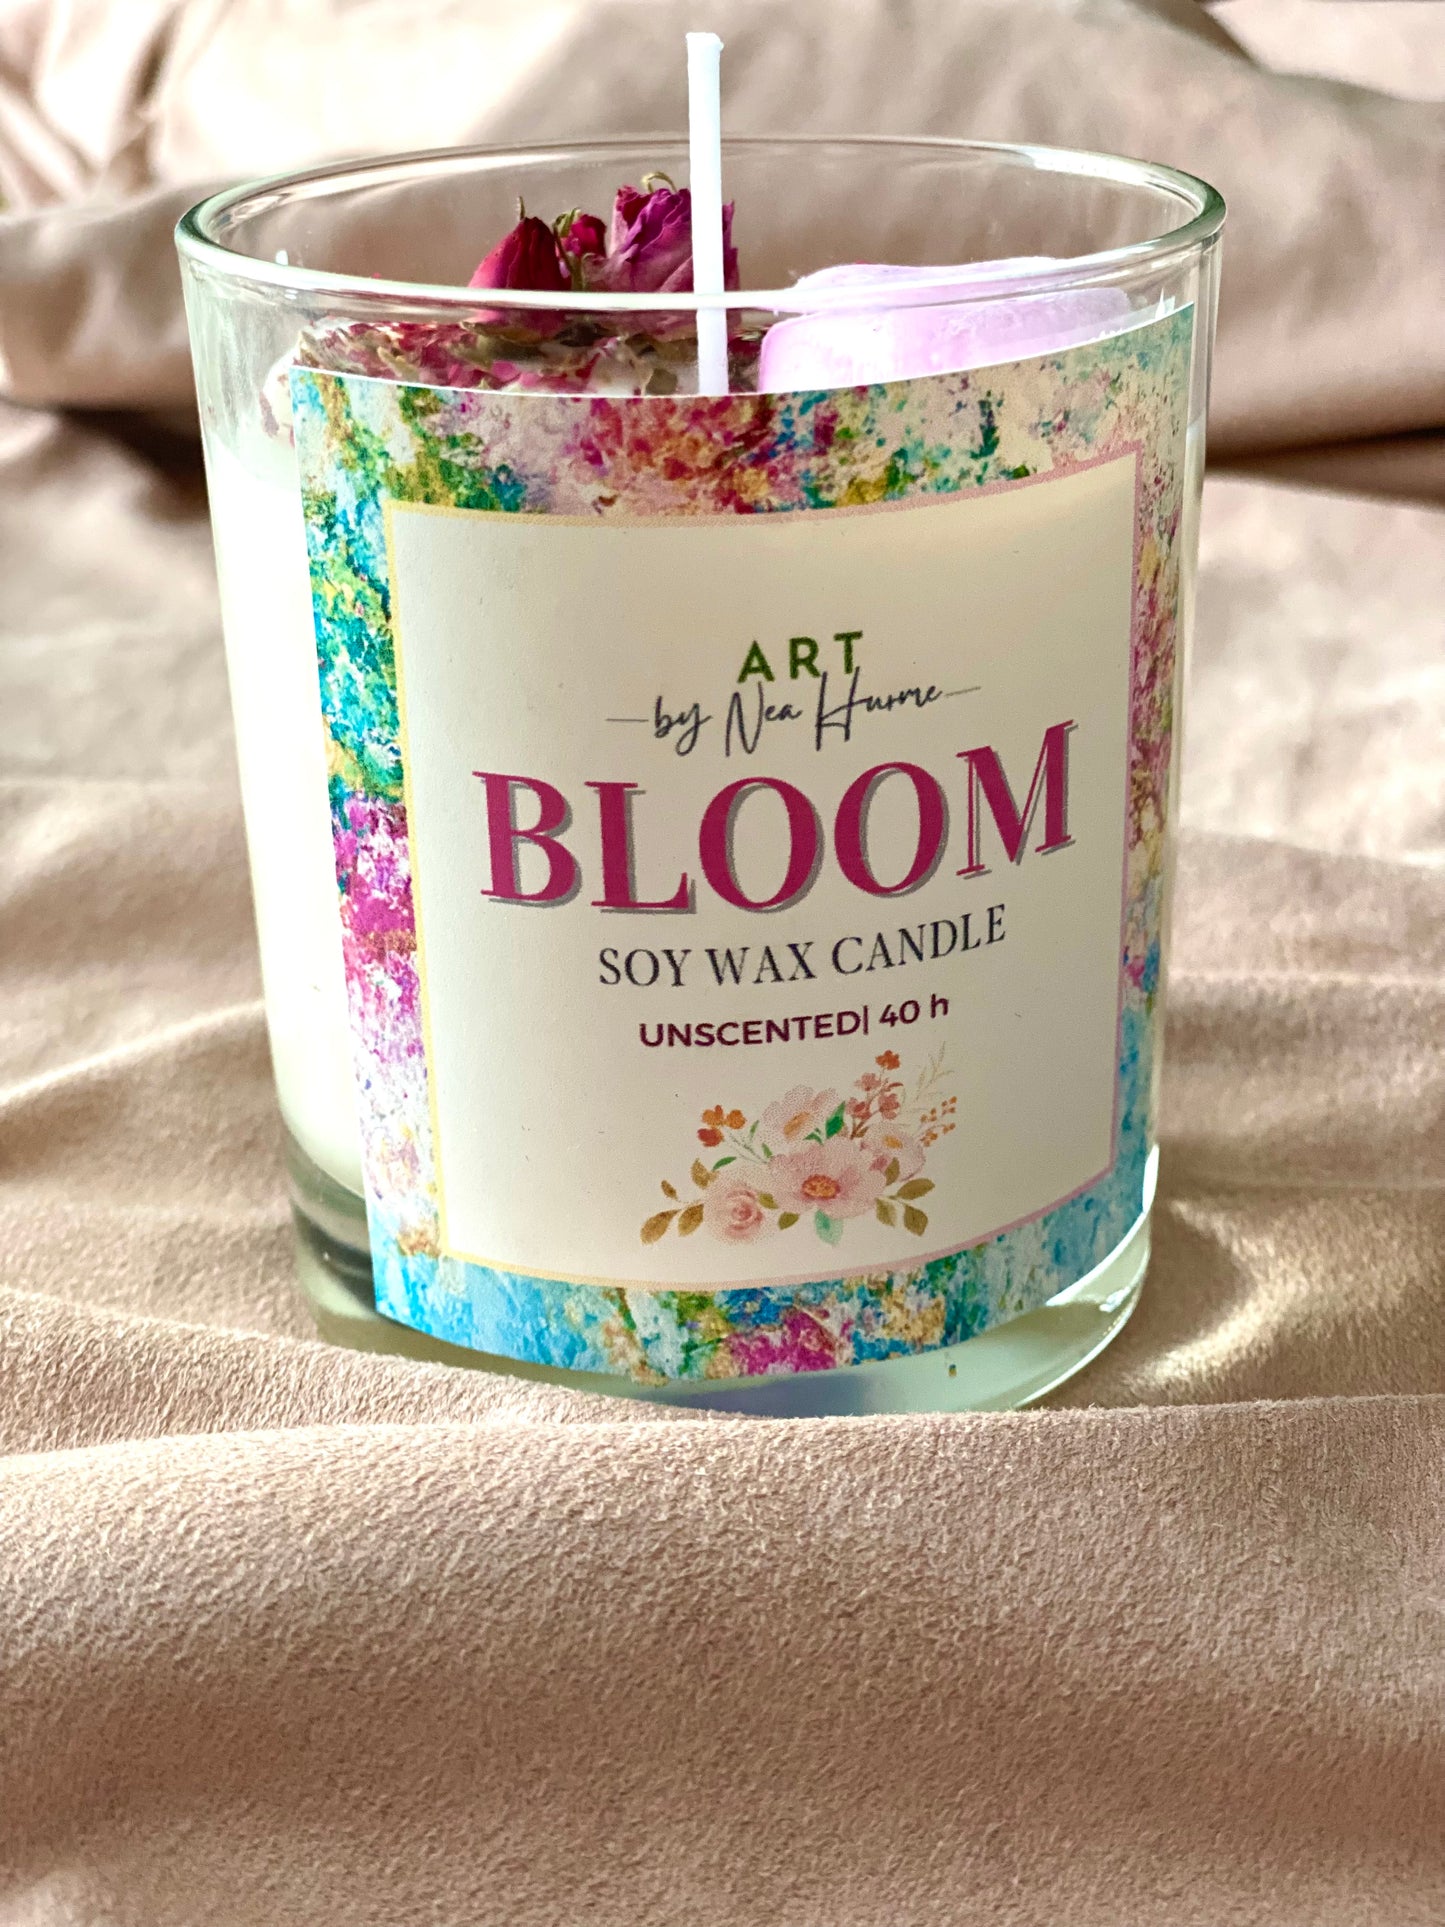 ”Bloom” soy wax candle